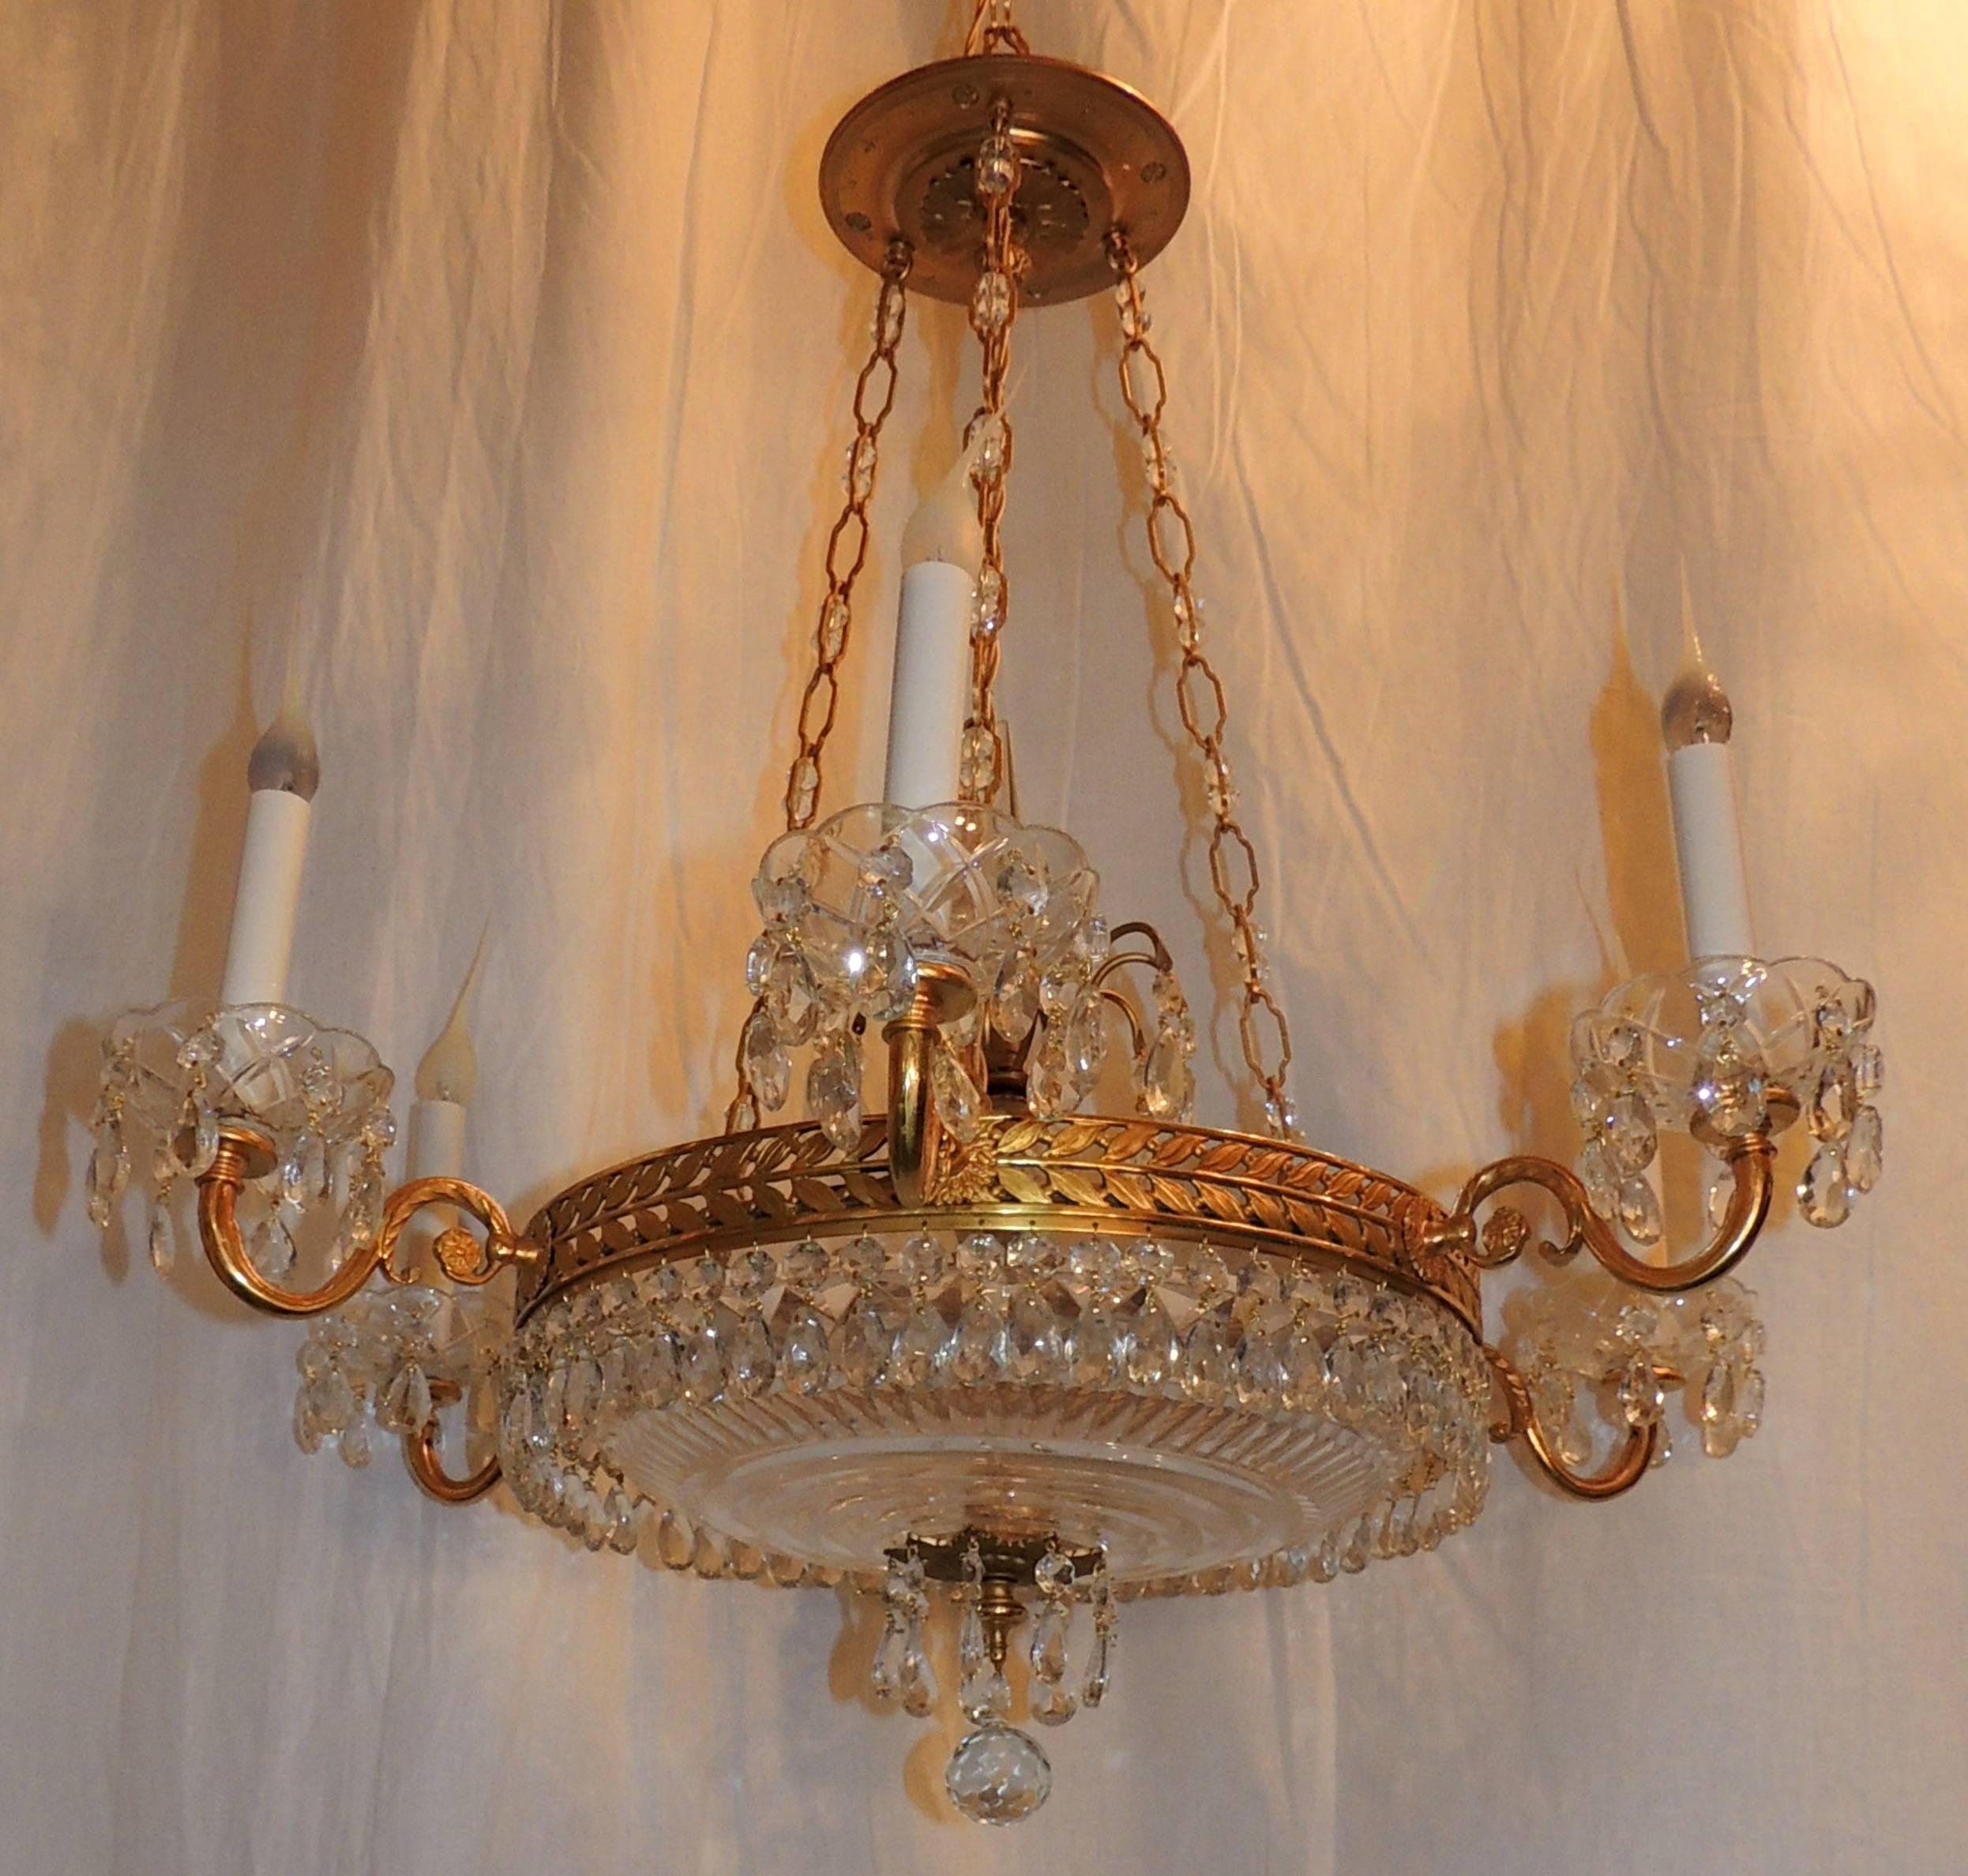 Gilt Wonderful French Dore Bronze Neoclassical Baltic Crystal Bowl Empire Chandelier